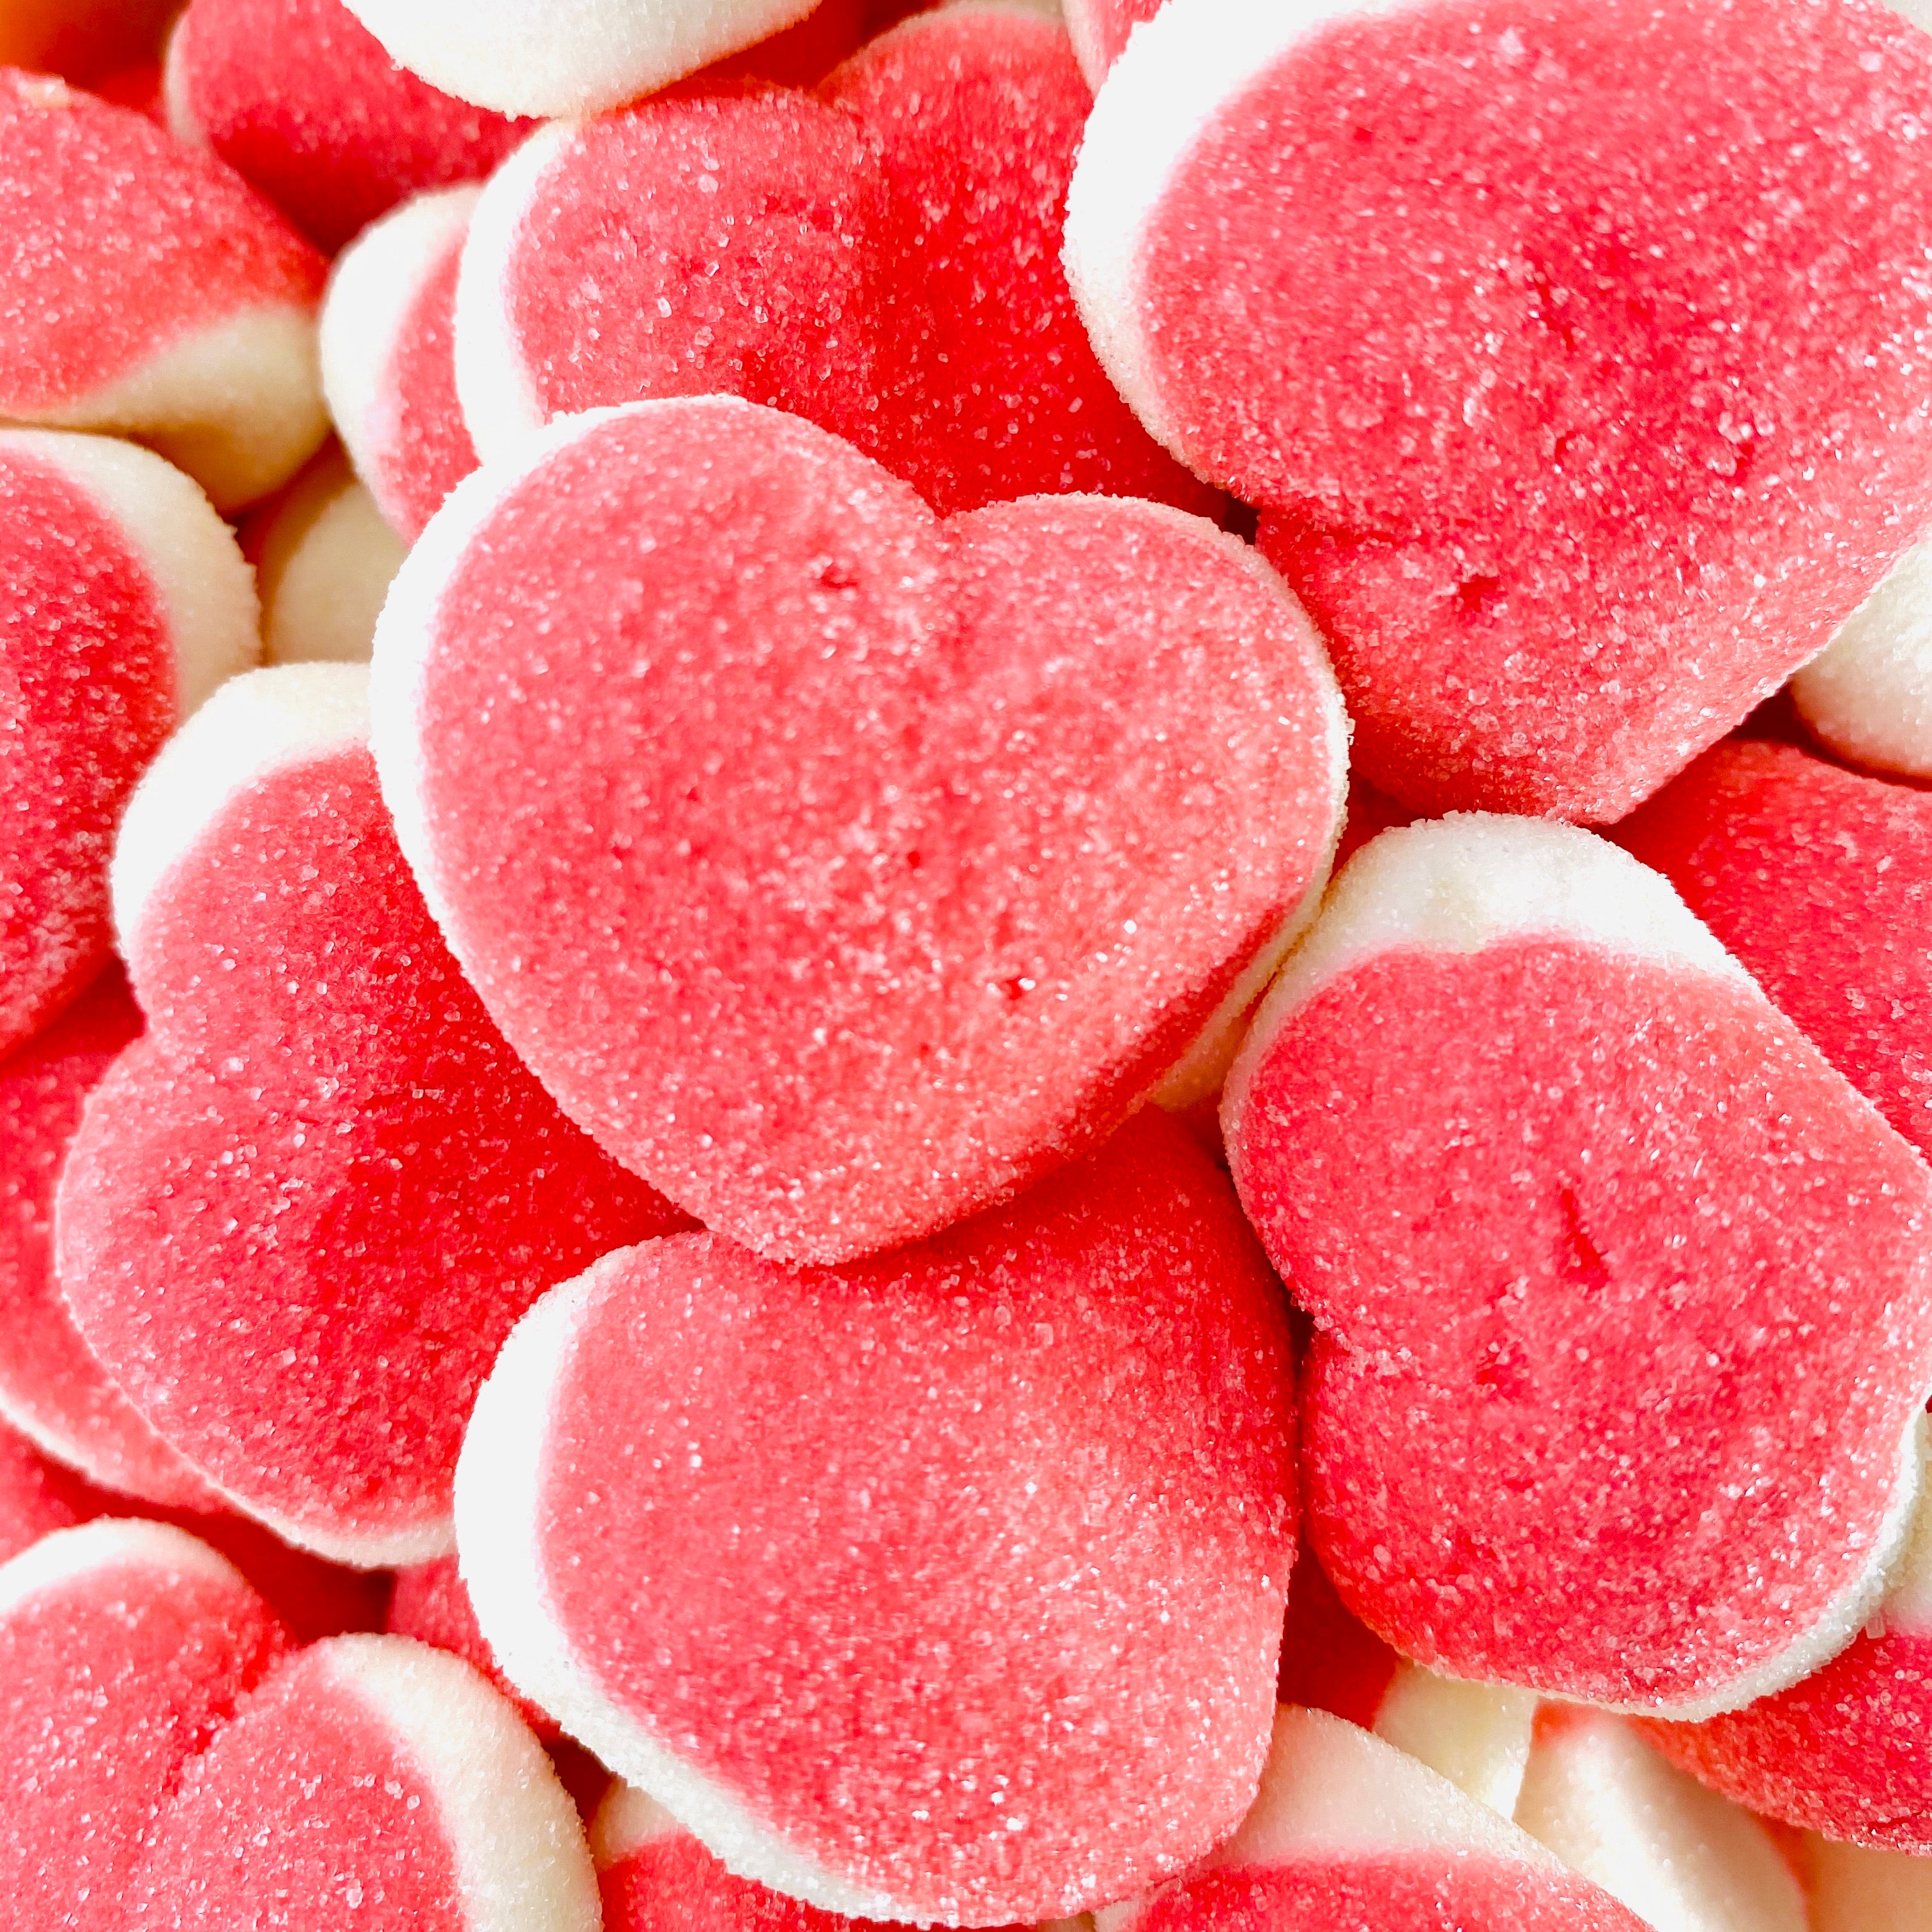 Strawberry Sweet Hearts 1kg Bulk – The Original Lolly Store